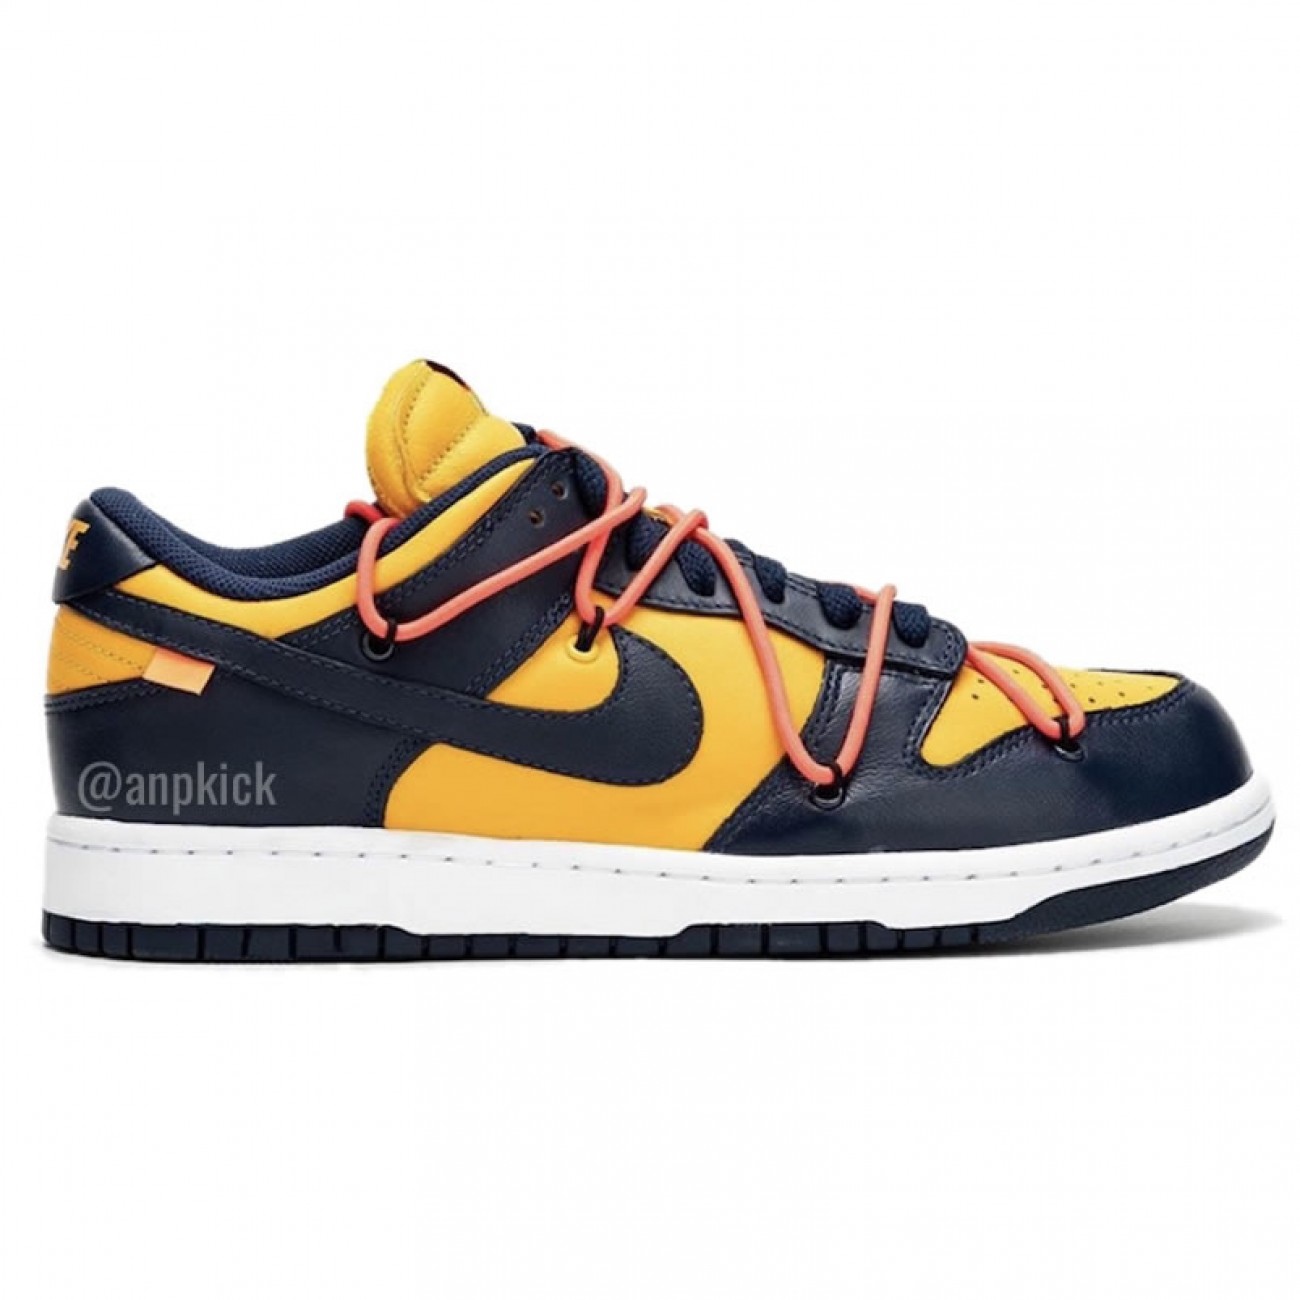 Off-White x Nike Dunk Low "University Gold" Release Date CT0856-700